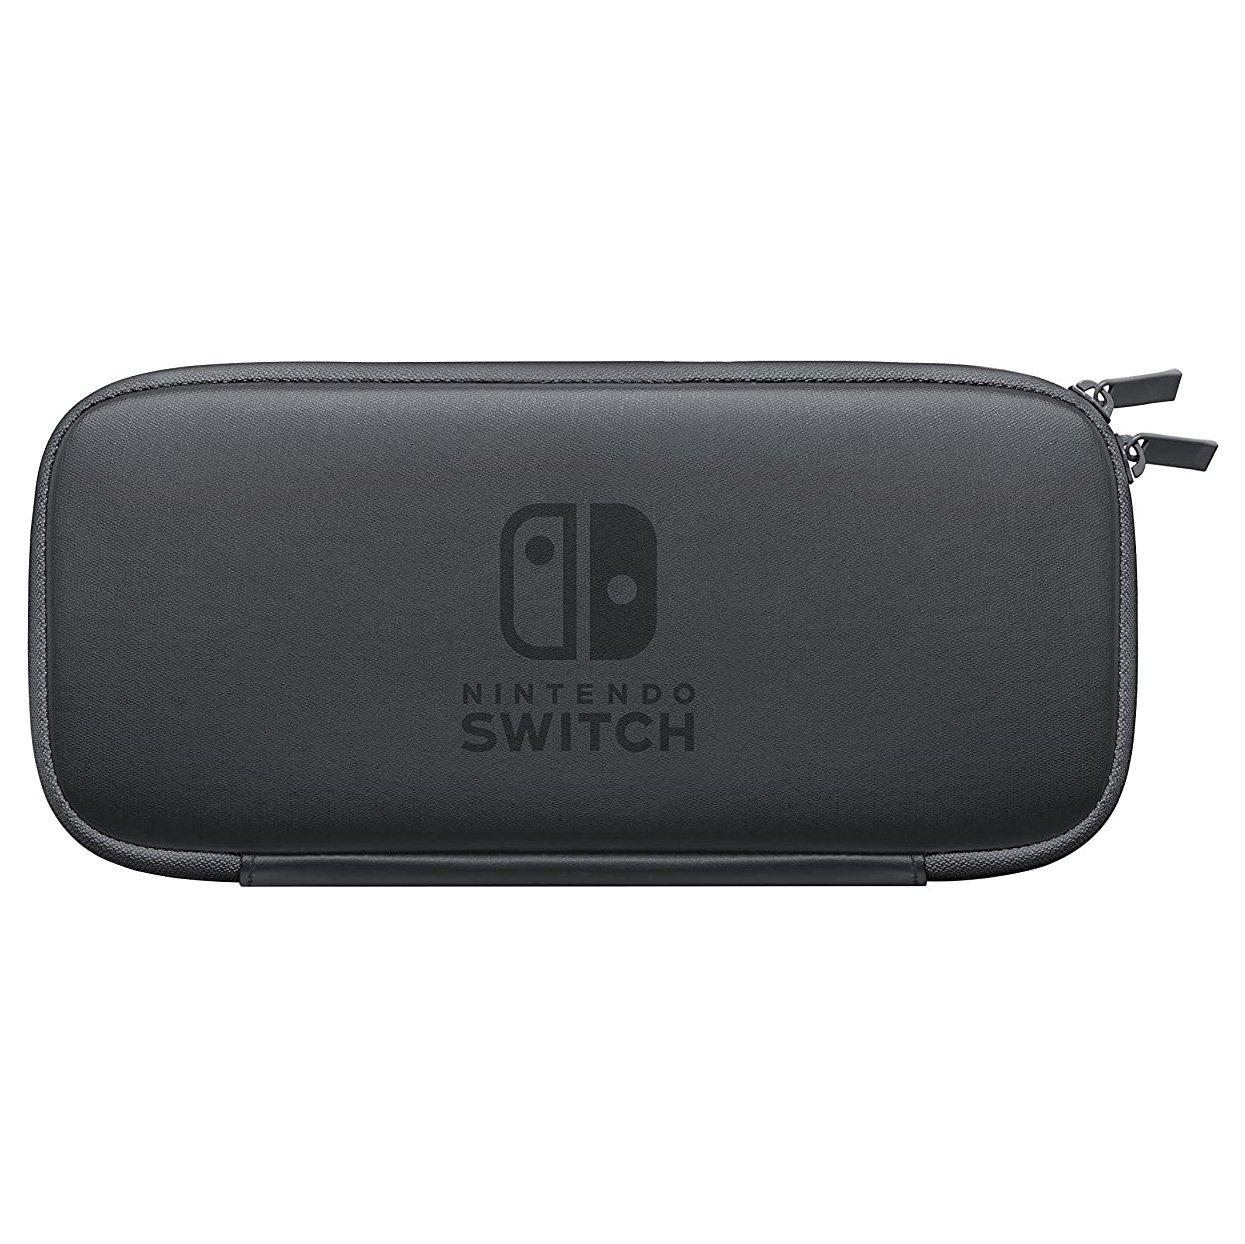 Carrying Case Assortment for Nintendo Switch